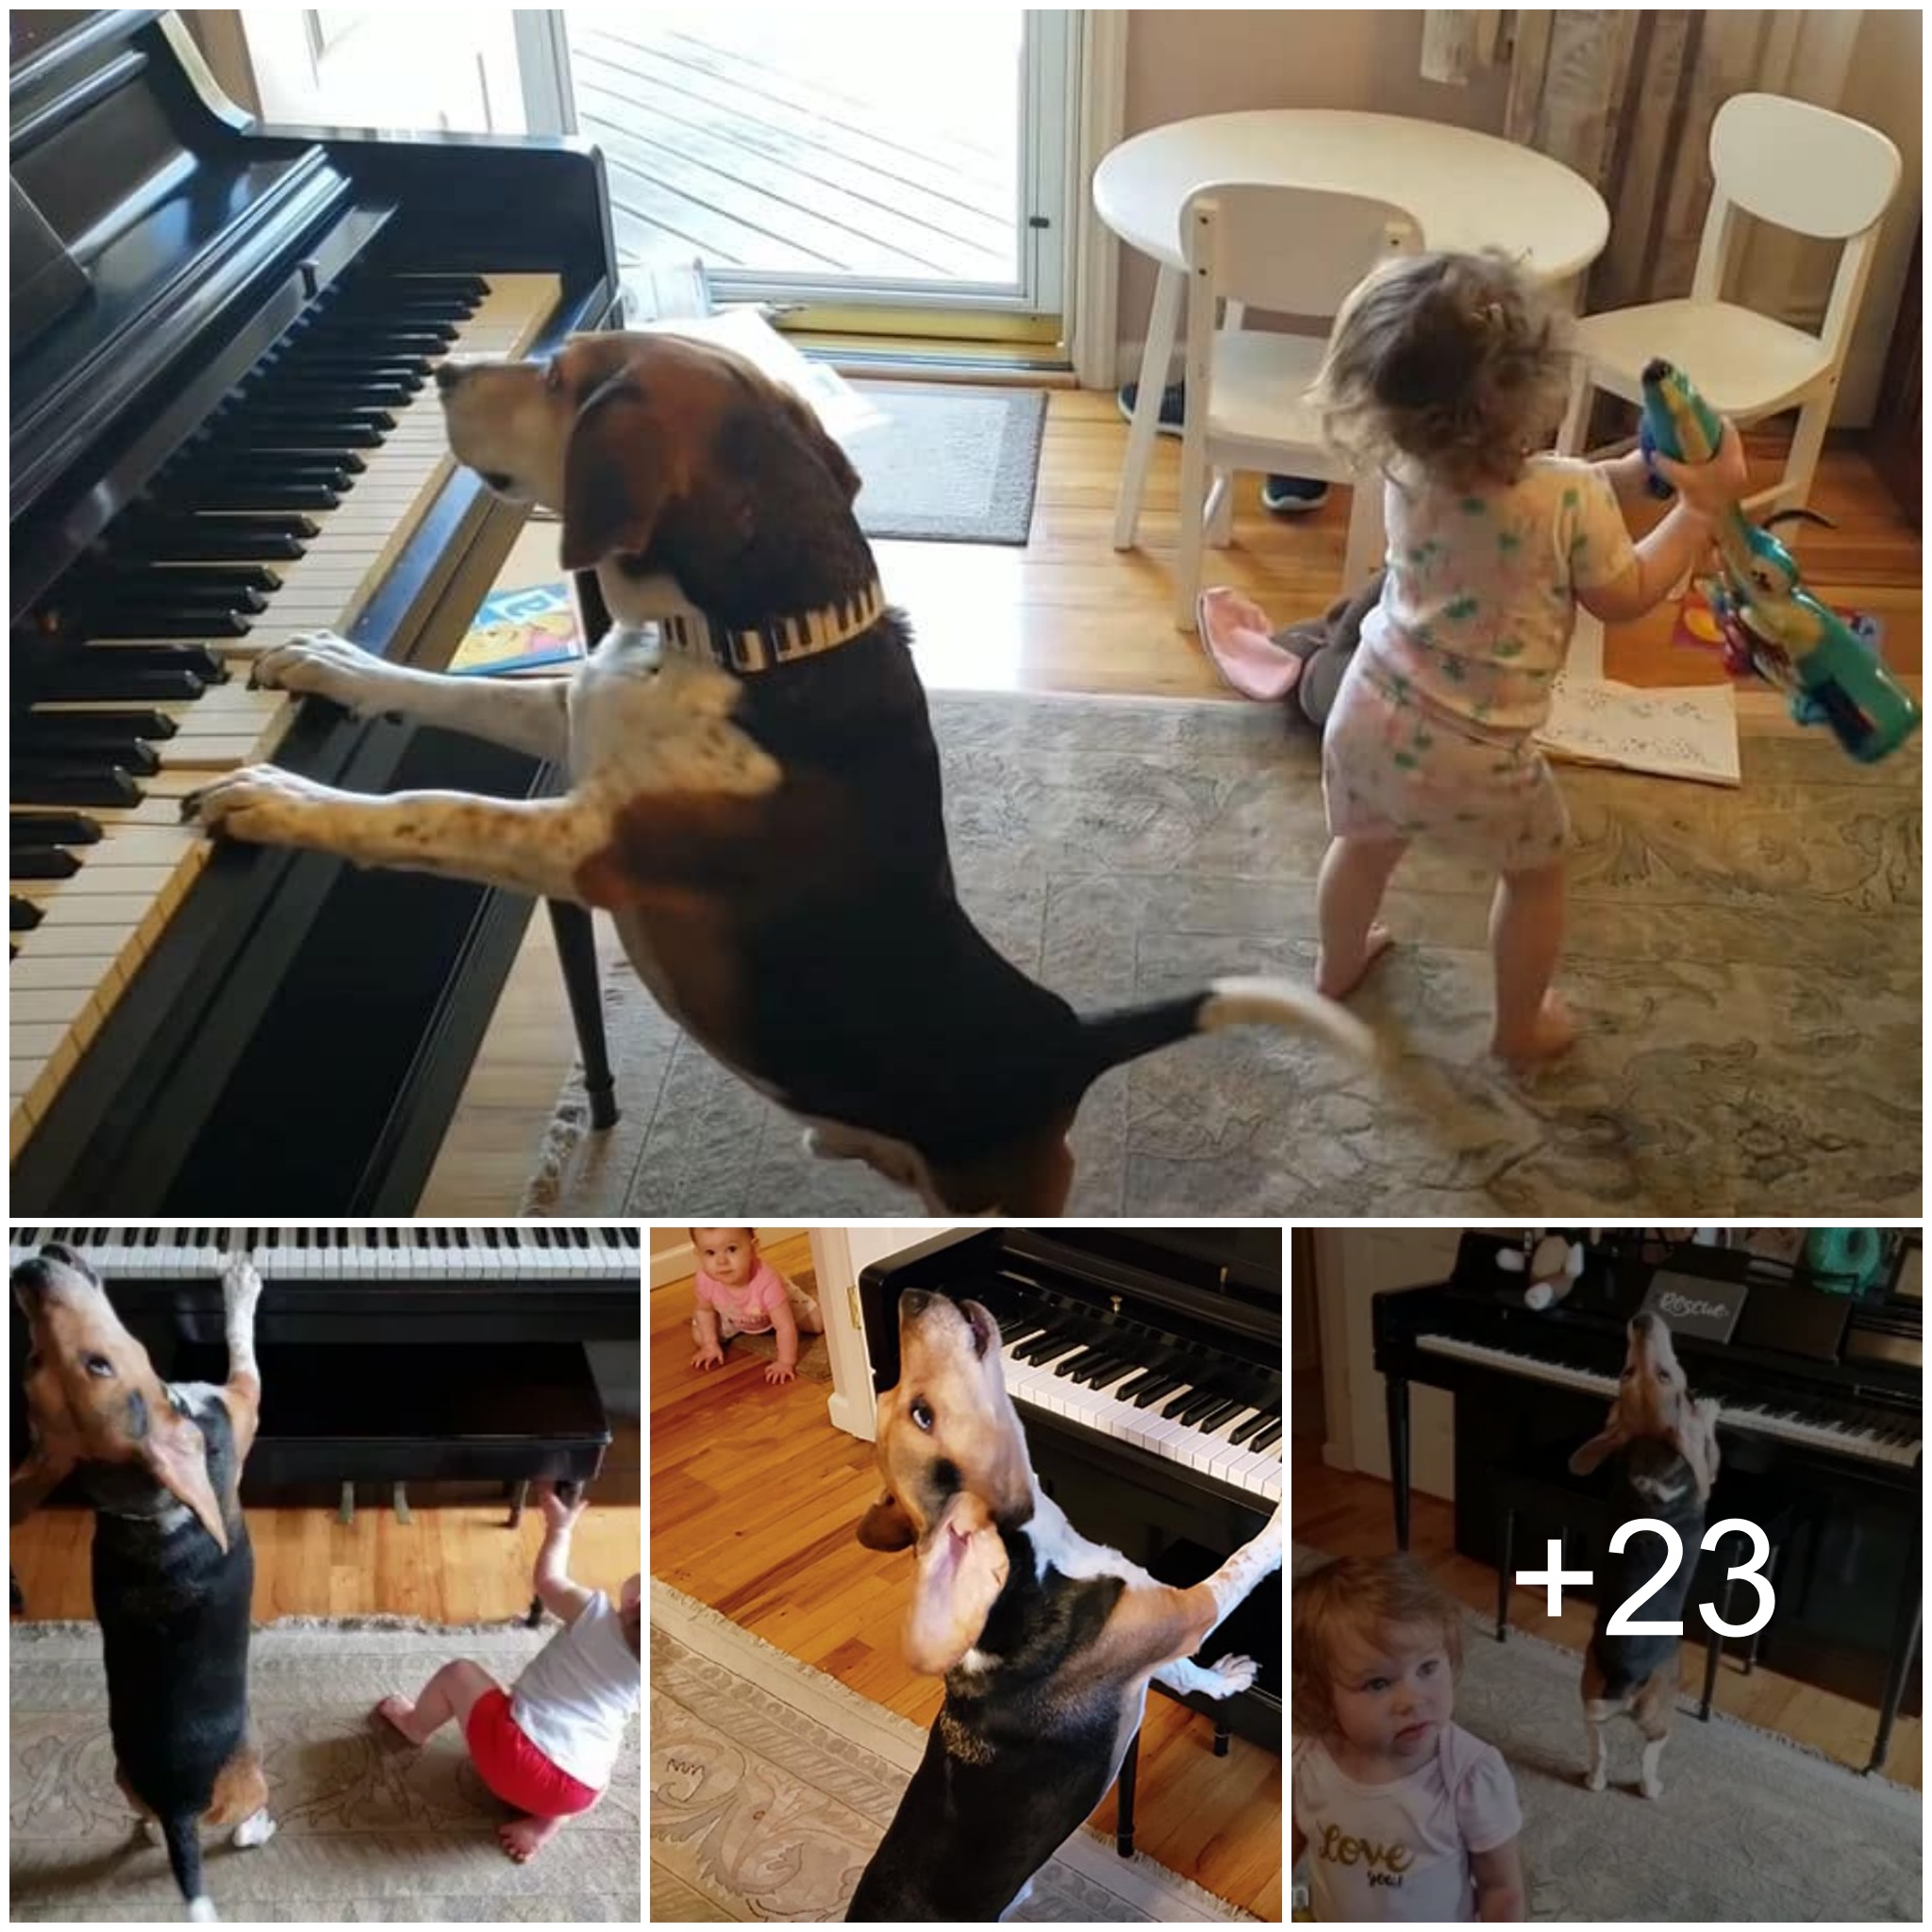 “Melodic Miracles: Blind Pianist Dog and Baby Duet Touch Hearts Online, Becoming Adorable Social Media Sensations!”